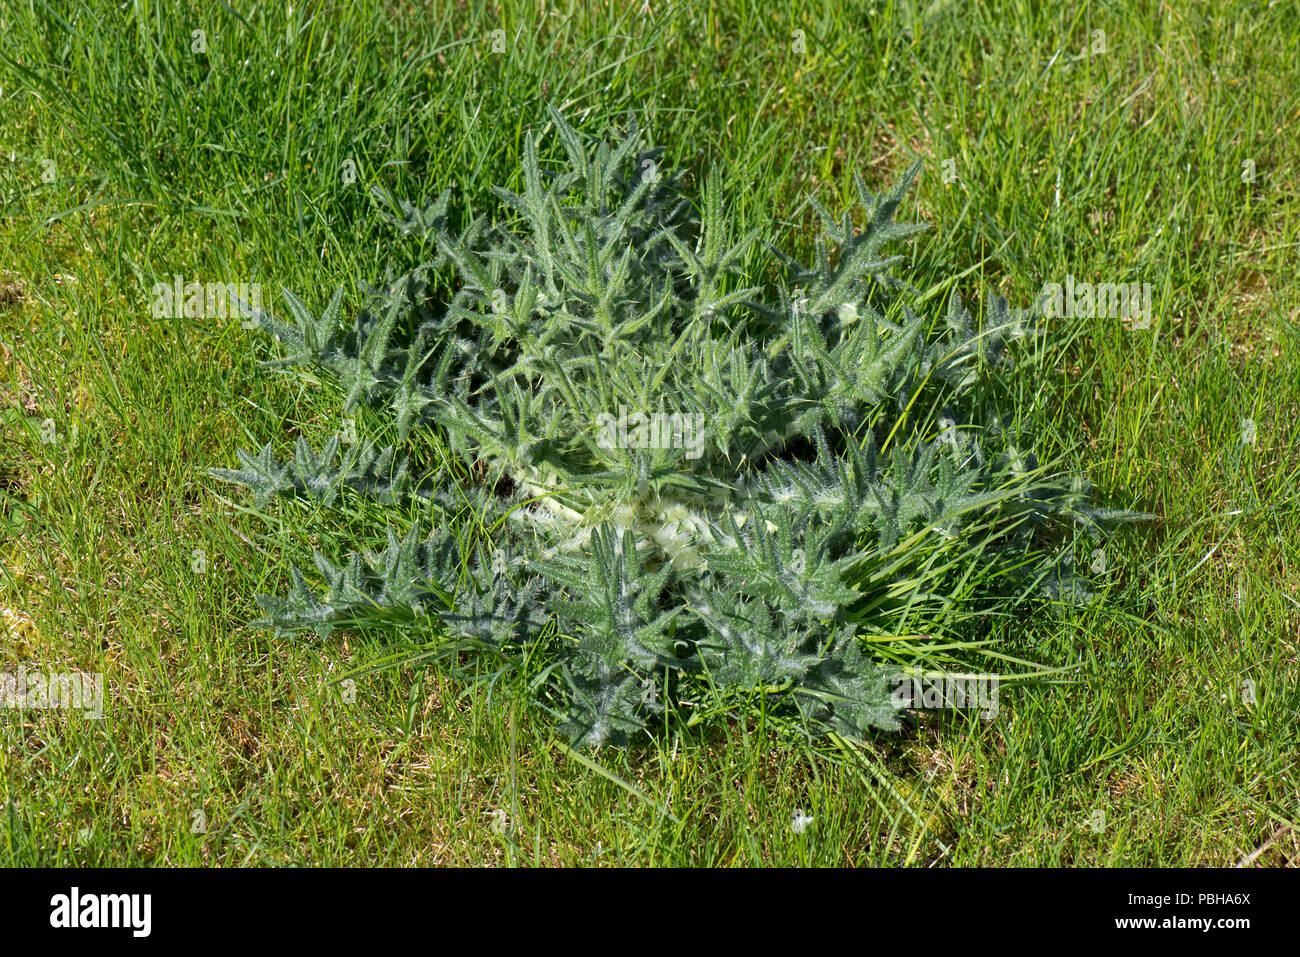 Rosette of leaves of a young spear thistle, Cirsium vulgare, in a young lawn, Berkshire, April Stock Photo